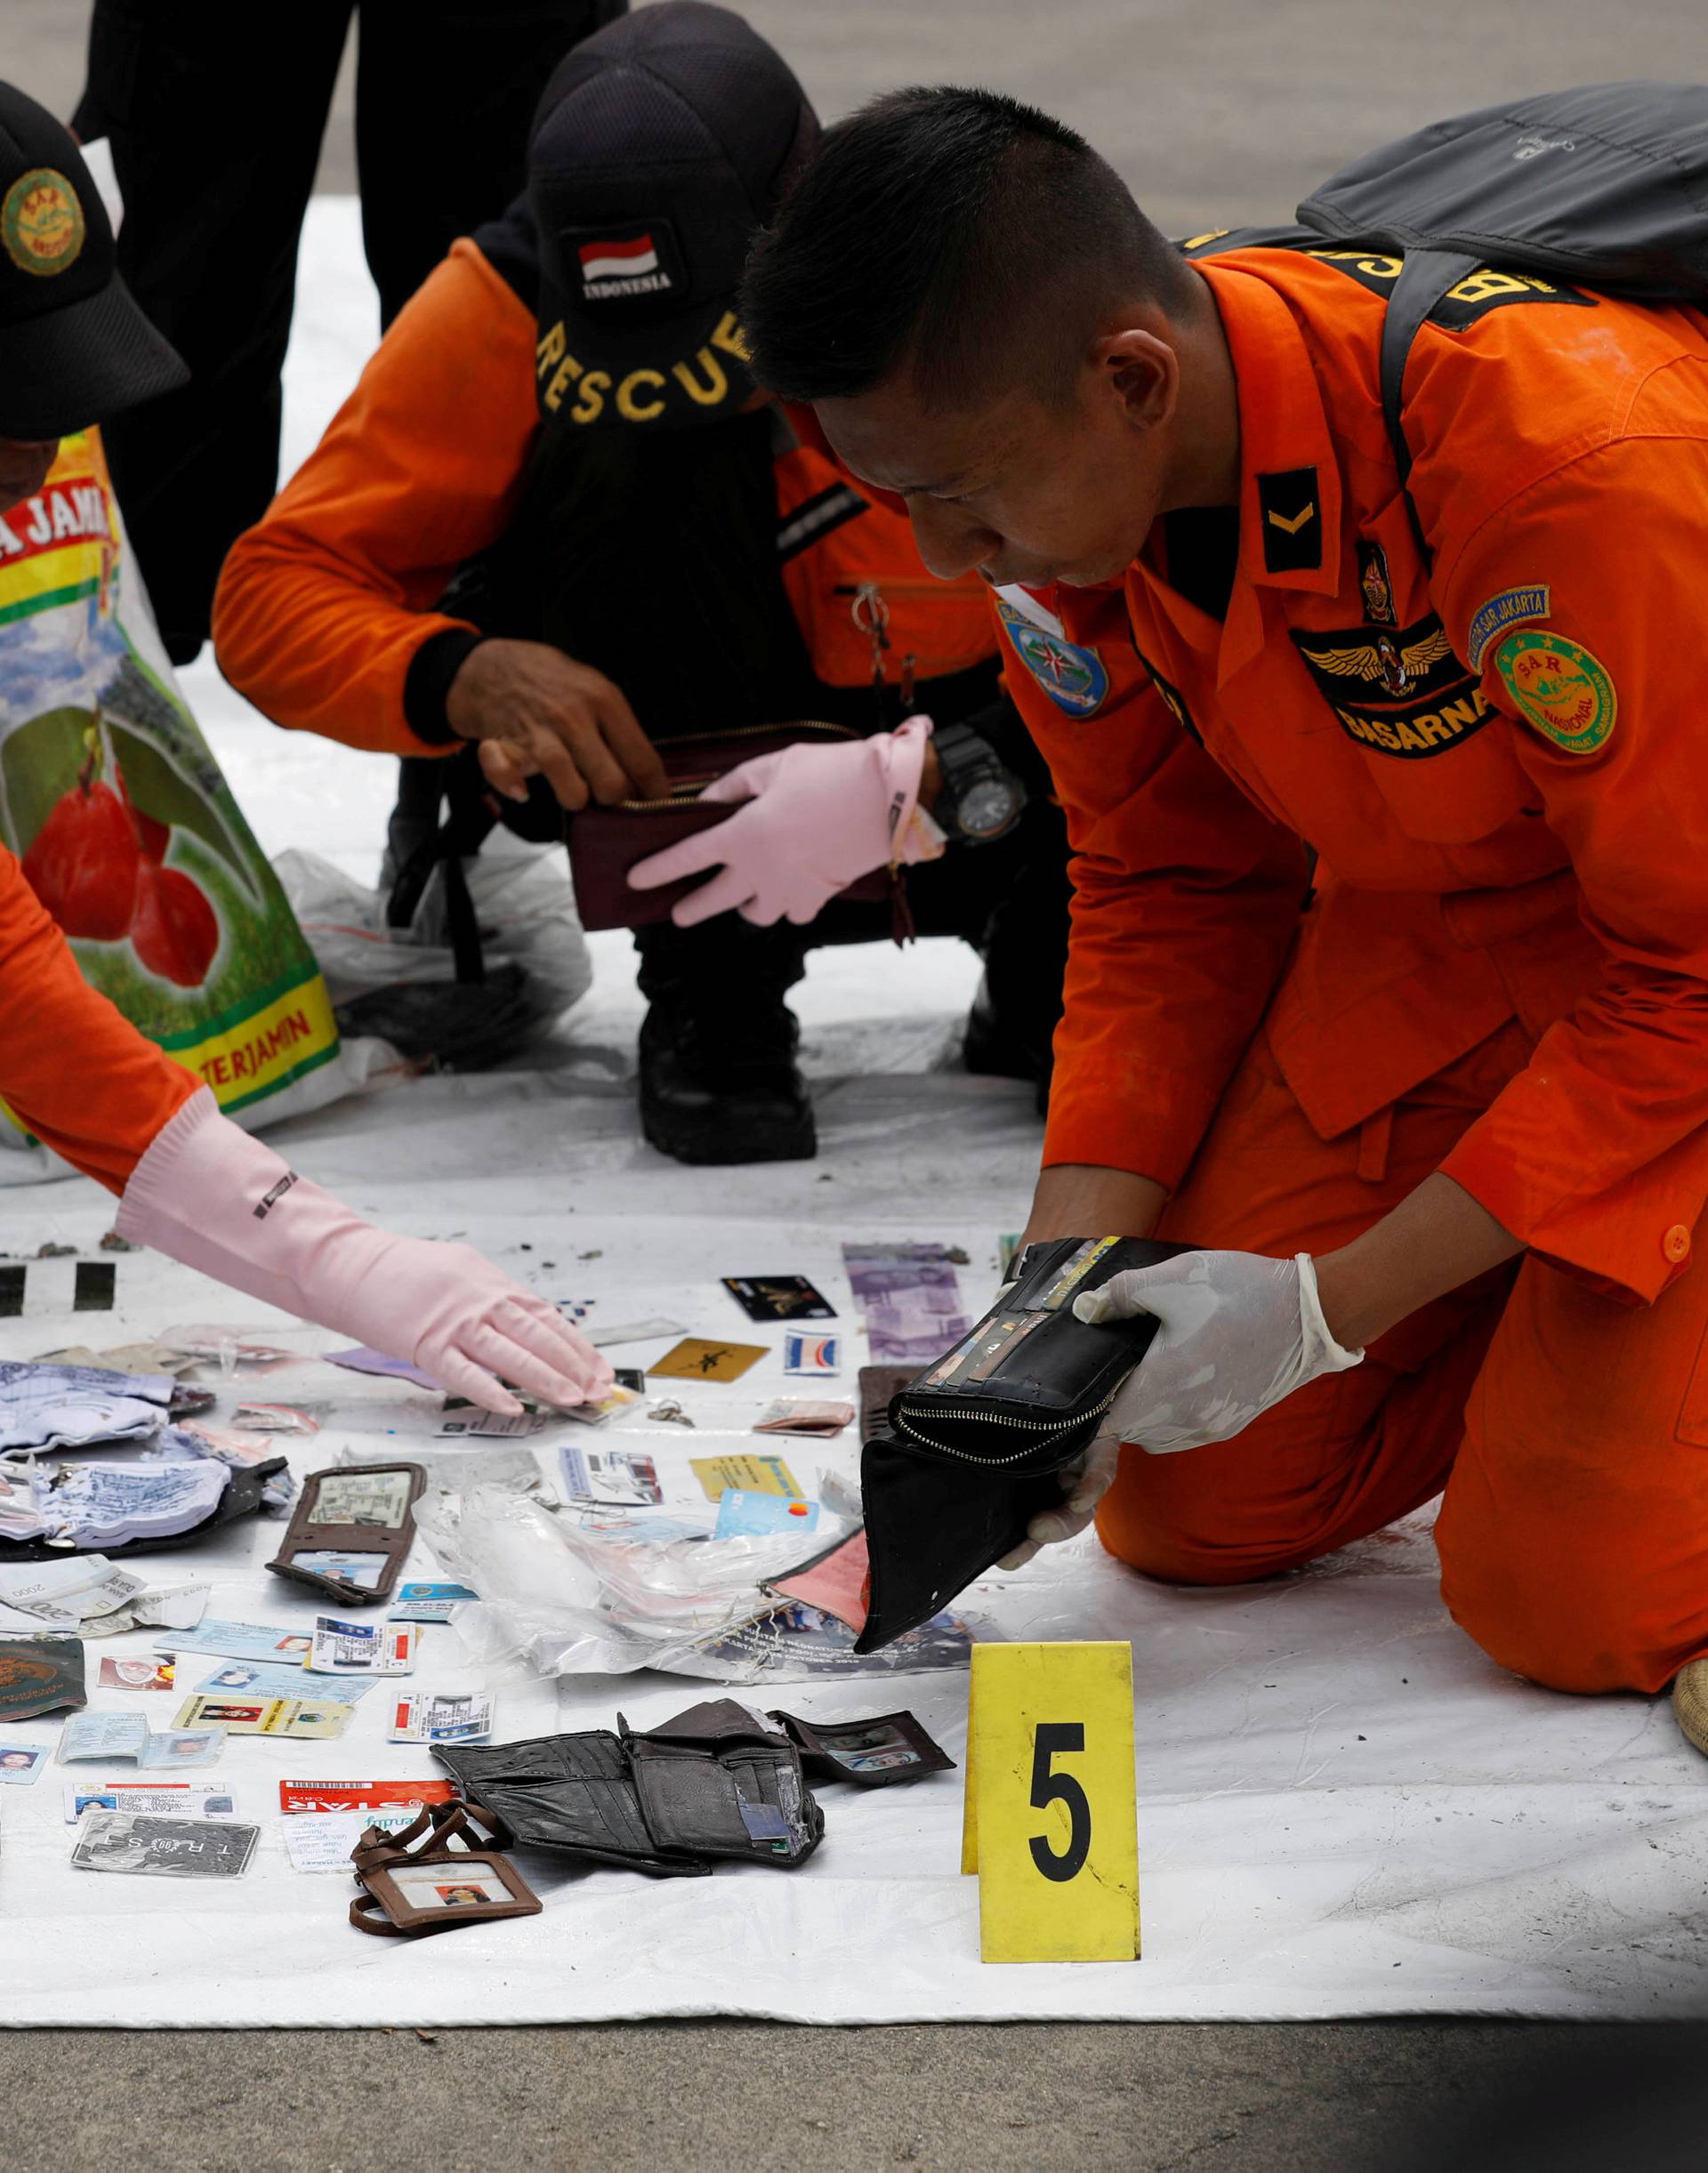 Rescue workers lay out recovered belongings believed to be from the crashed Lion Air flight JT610 at Tanjung Priok port in Jakarta